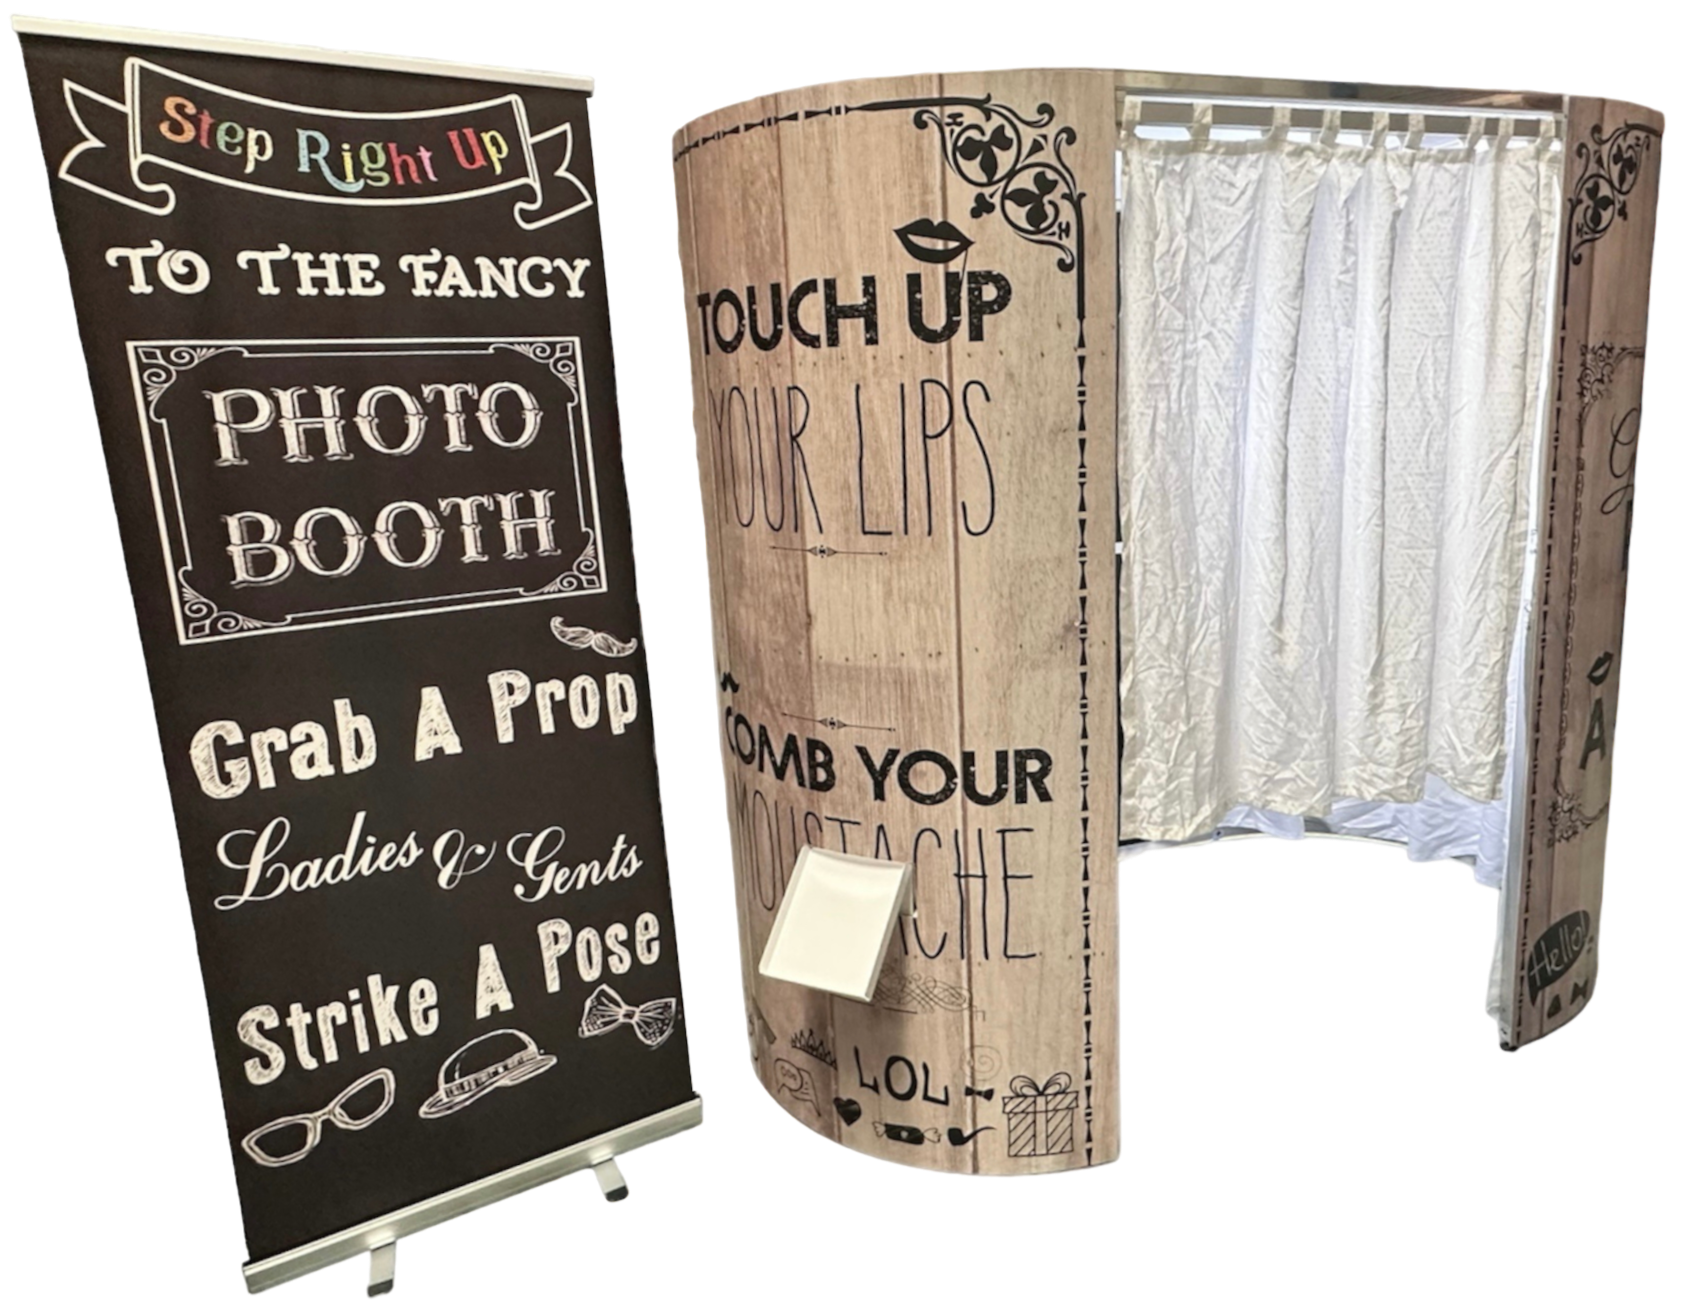 SnapTastic - Event hire - PhotoBooth, Popcorn & Candy floss machine